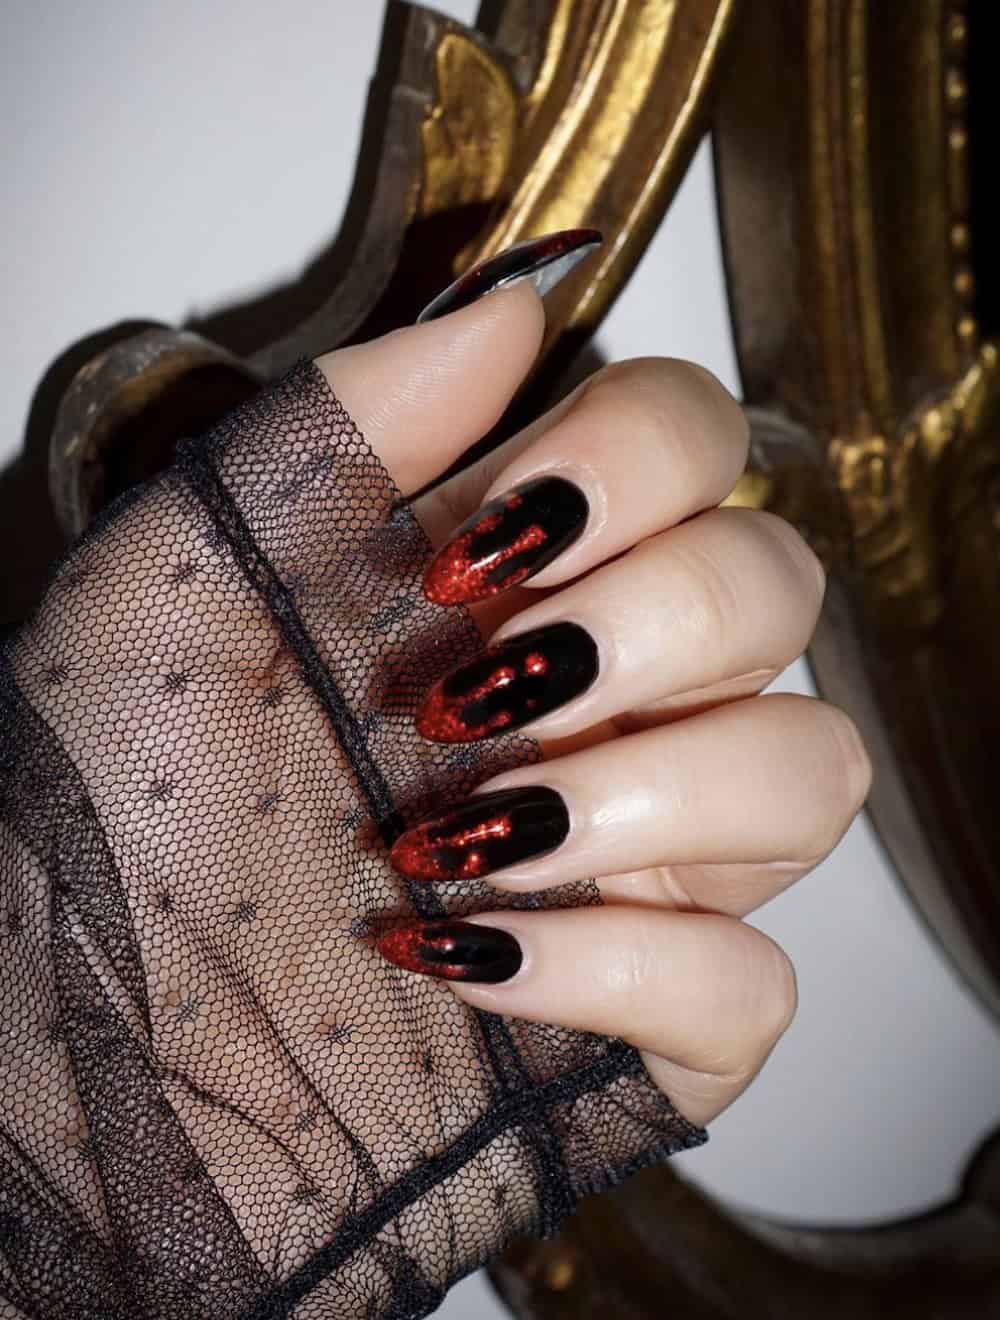 long black almond nails with glittering red dripping tips